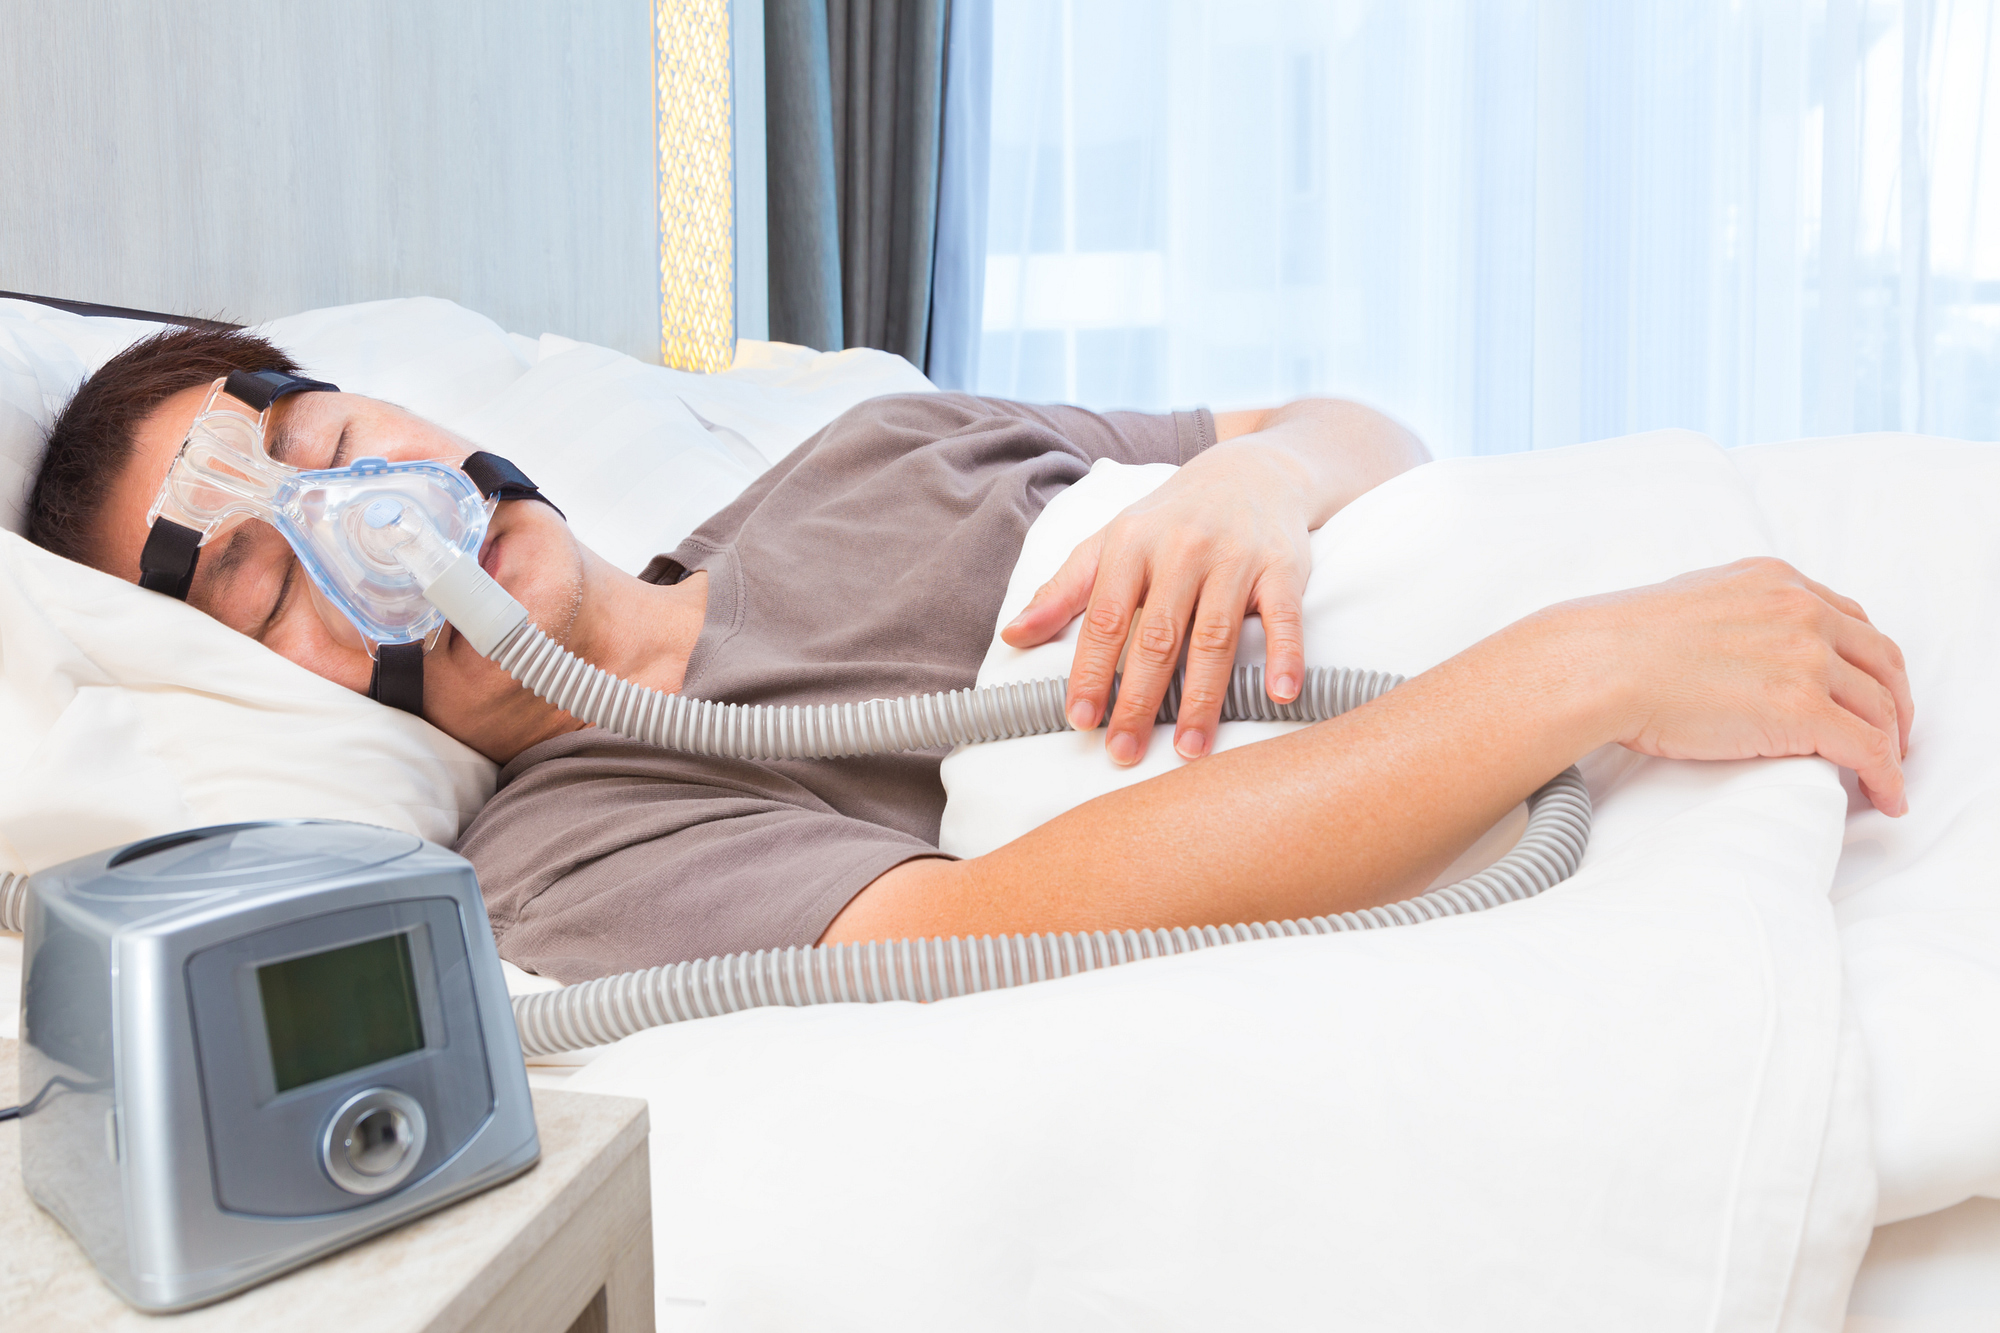 Suffer from sleep apnea and want to sleep better? Here are some methods you can try to help improve your sleep cycle if you use a CPAP machine.